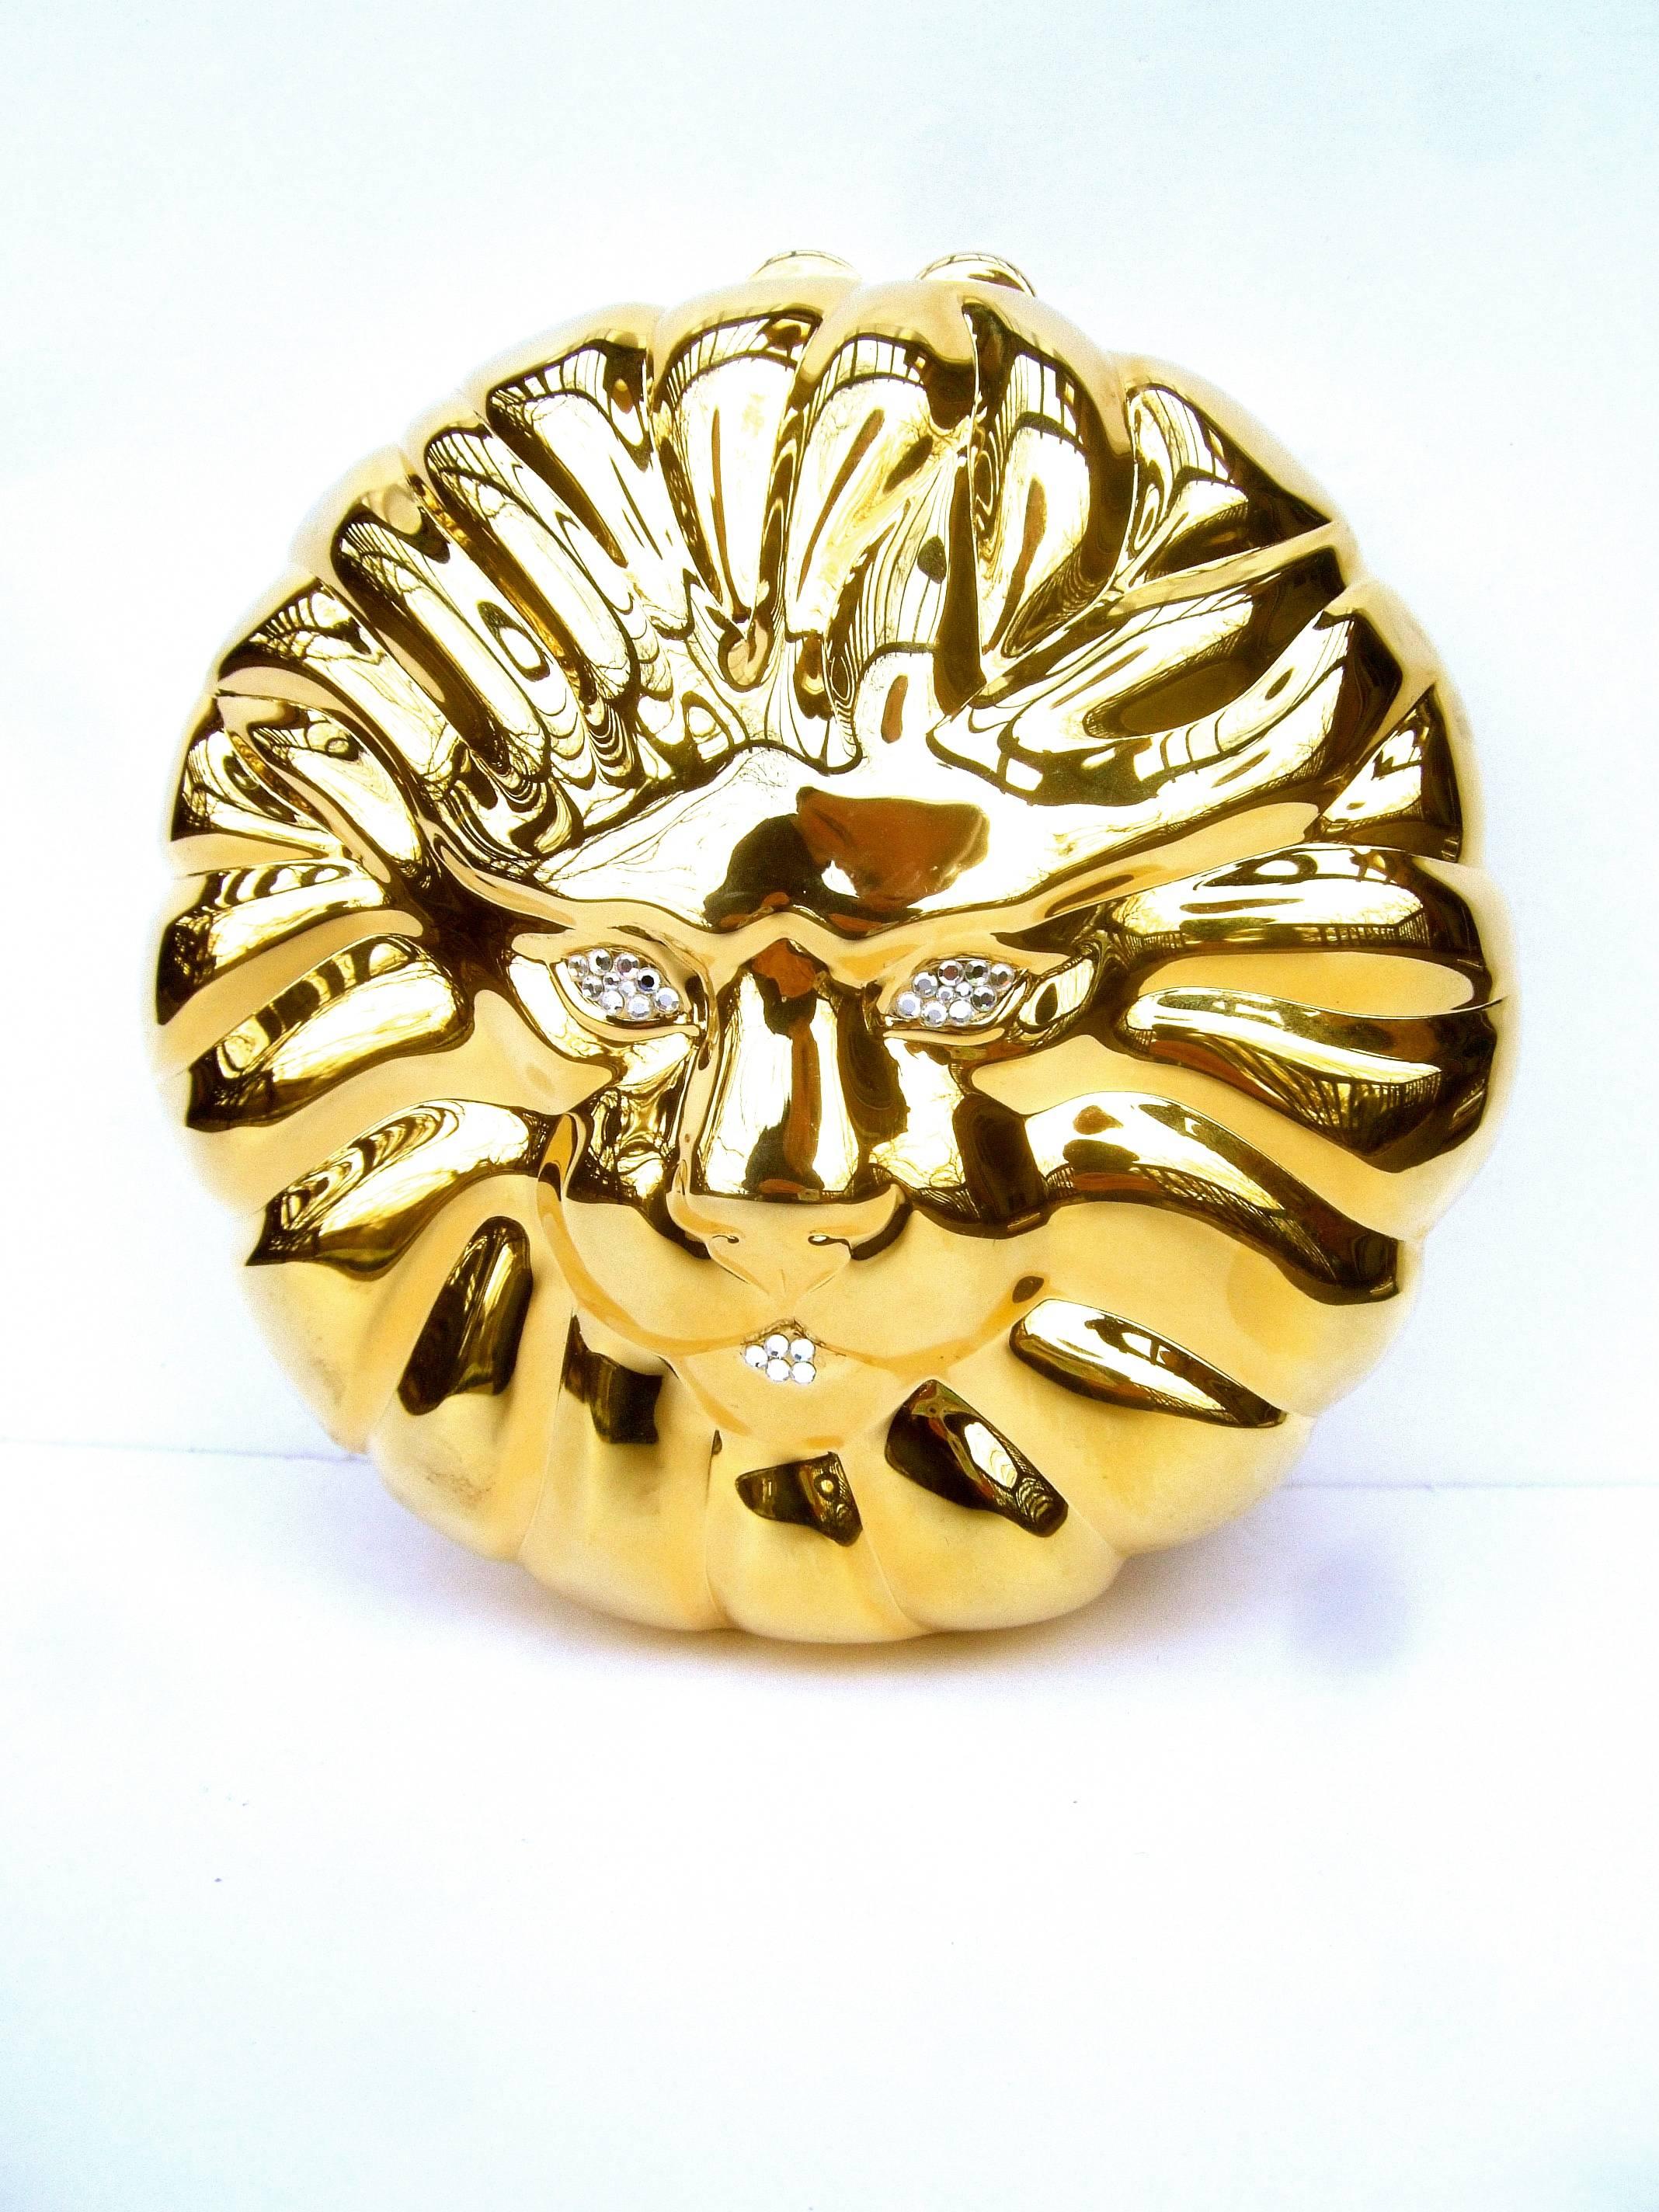 Sleek gilt metal lion face evening bag ca 1980s
The elegant evening bag is designed with a 
stylized lion's face accented with glittering  
diamante crystal eyes & mouth 

The rounded gilt metal front exterior has 
impressed ridges that emulate the